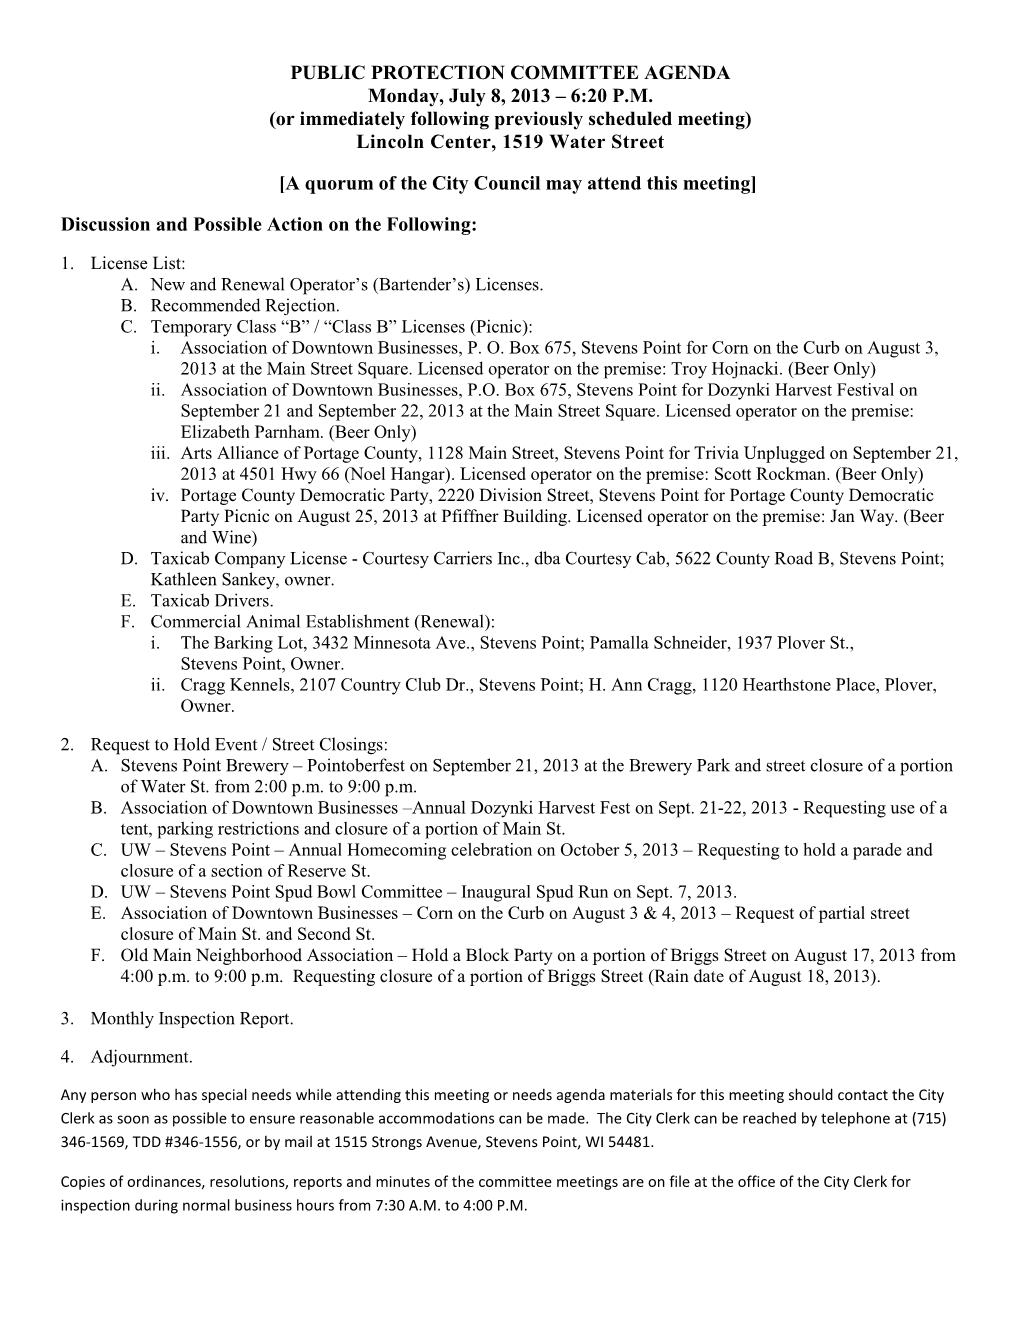 PUBLIC PROTECTION COMMITTEE AGENDA Monday, July 8, 2013 – 6:20 P.M. (Or Immediately Following Previously Scheduled Meeting) Lincoln Center, 1519 Water Street